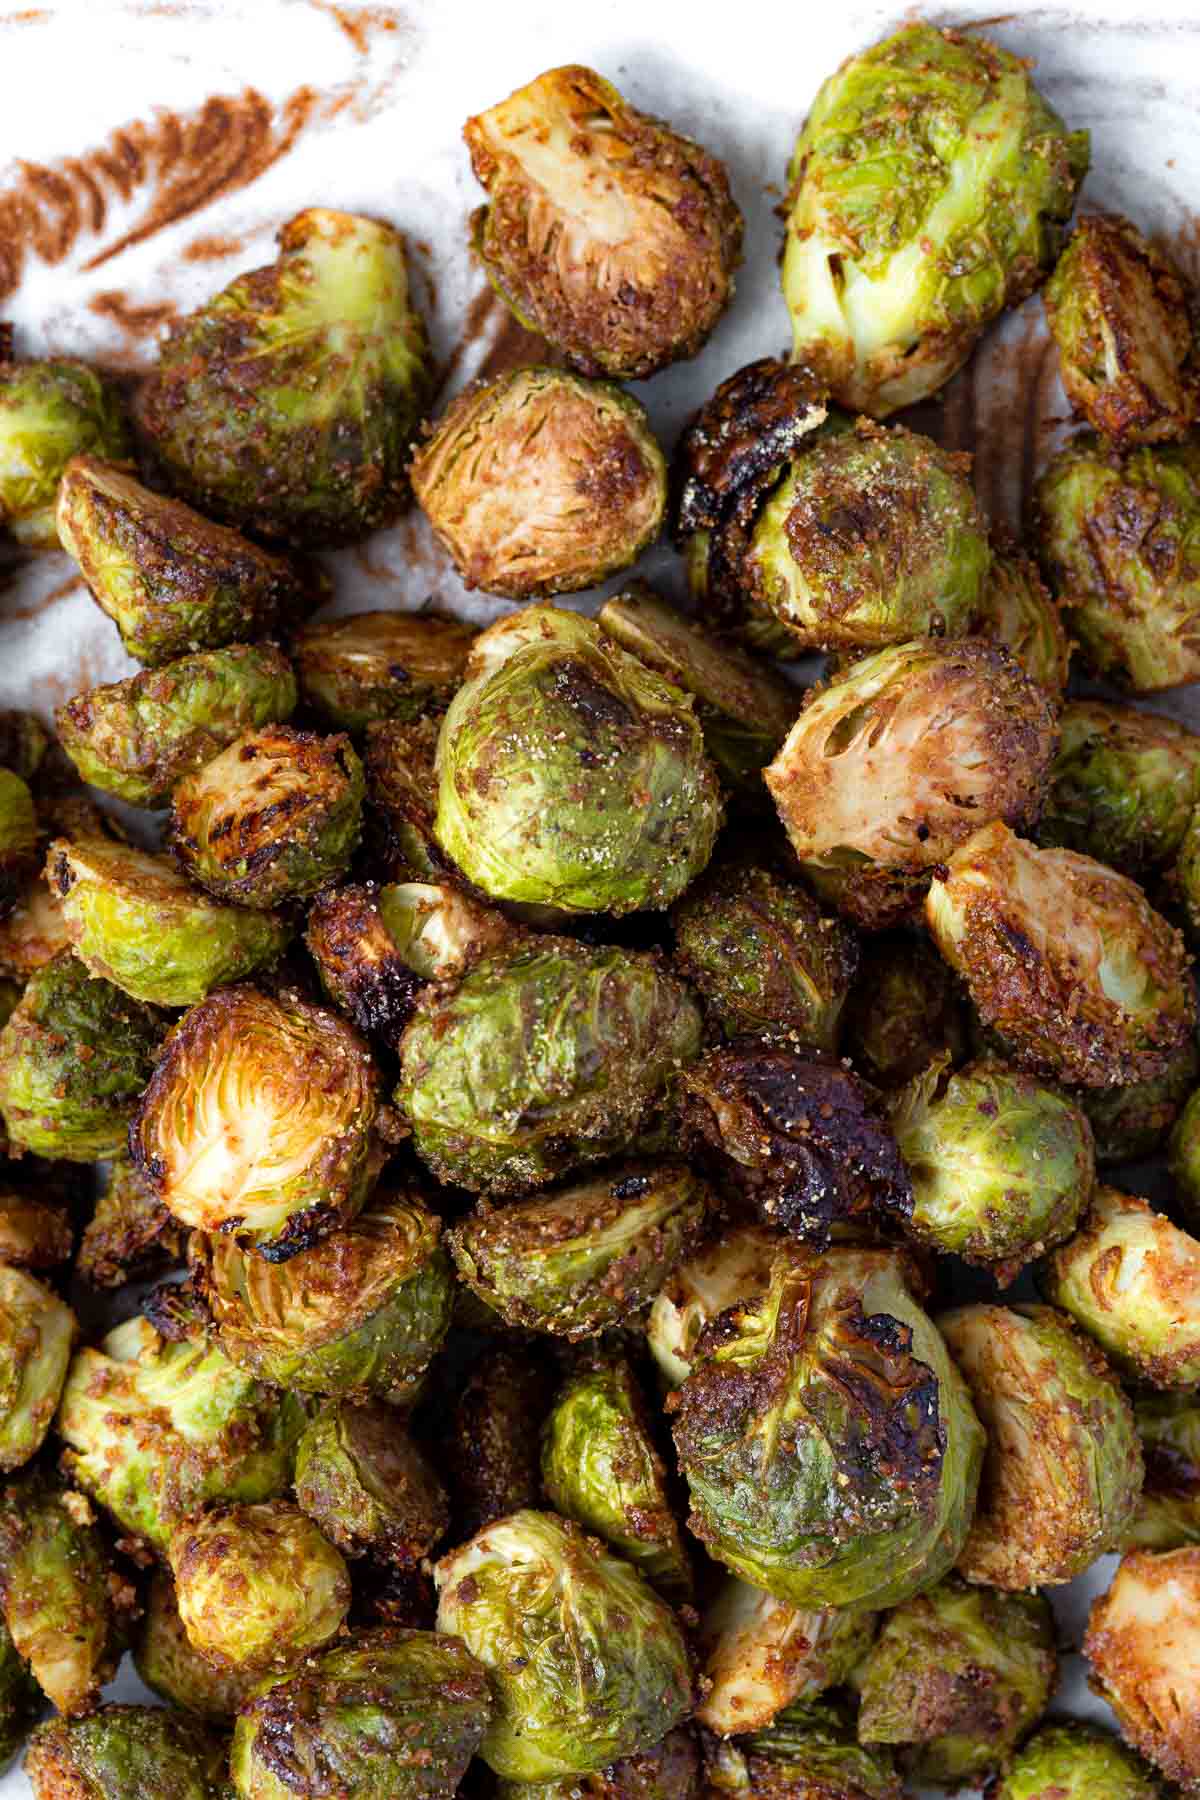 A closeup view of Maple Balsamic Roasted Brussels Sprouts on a plate.